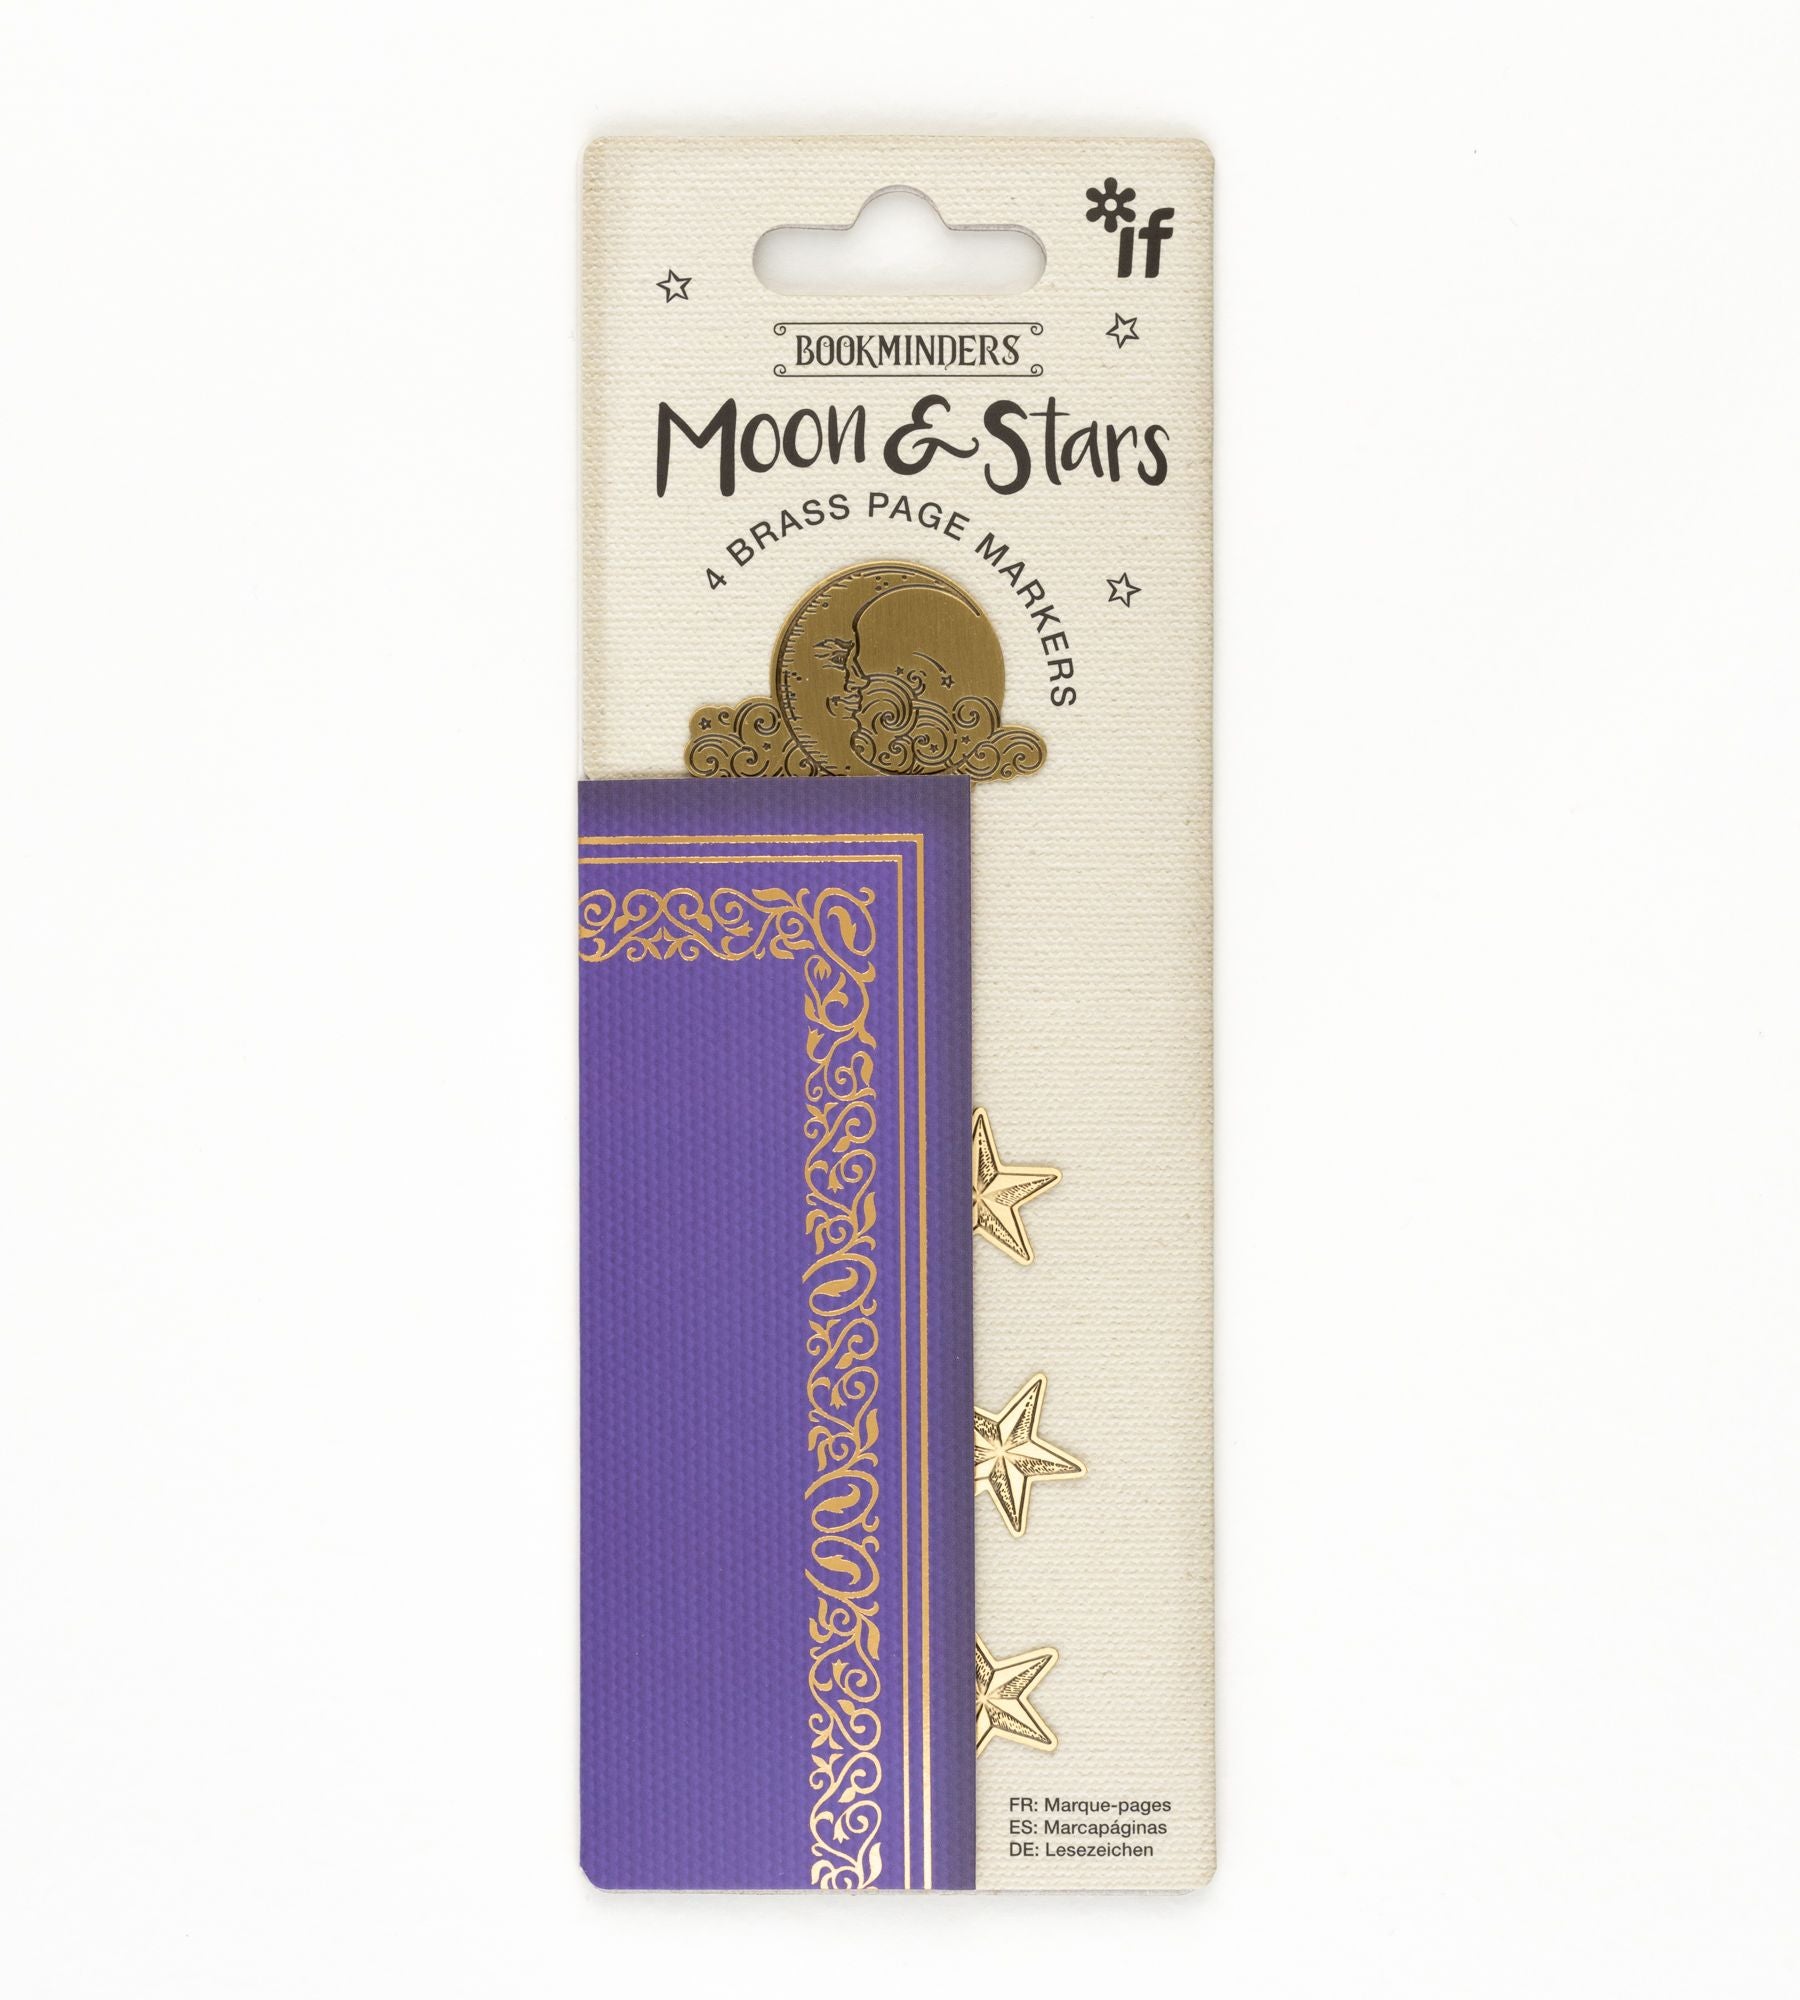 'Moon & Stars' brass effect page markers